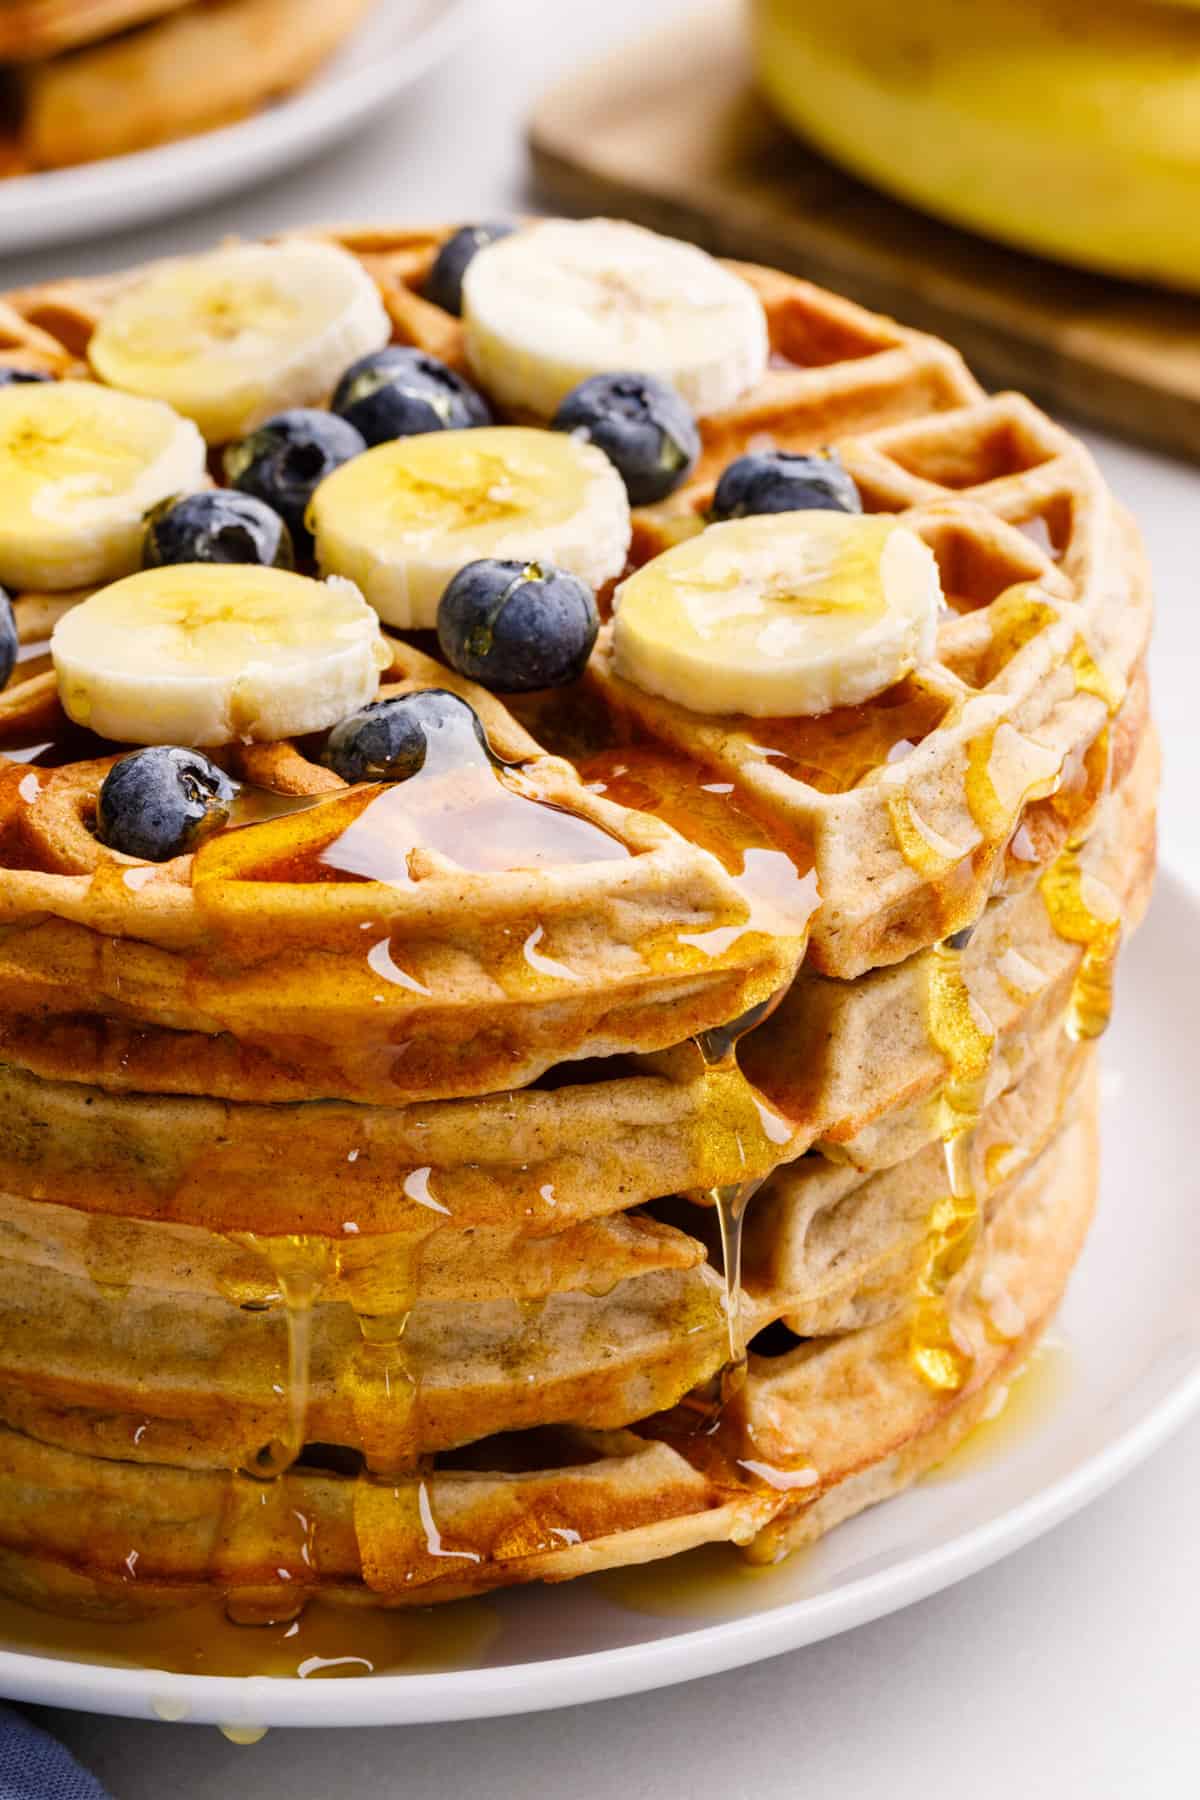 close up image of a stack of four banana waffles topped with syrup, sliced bananas and fresh blueberries served on a white round plate